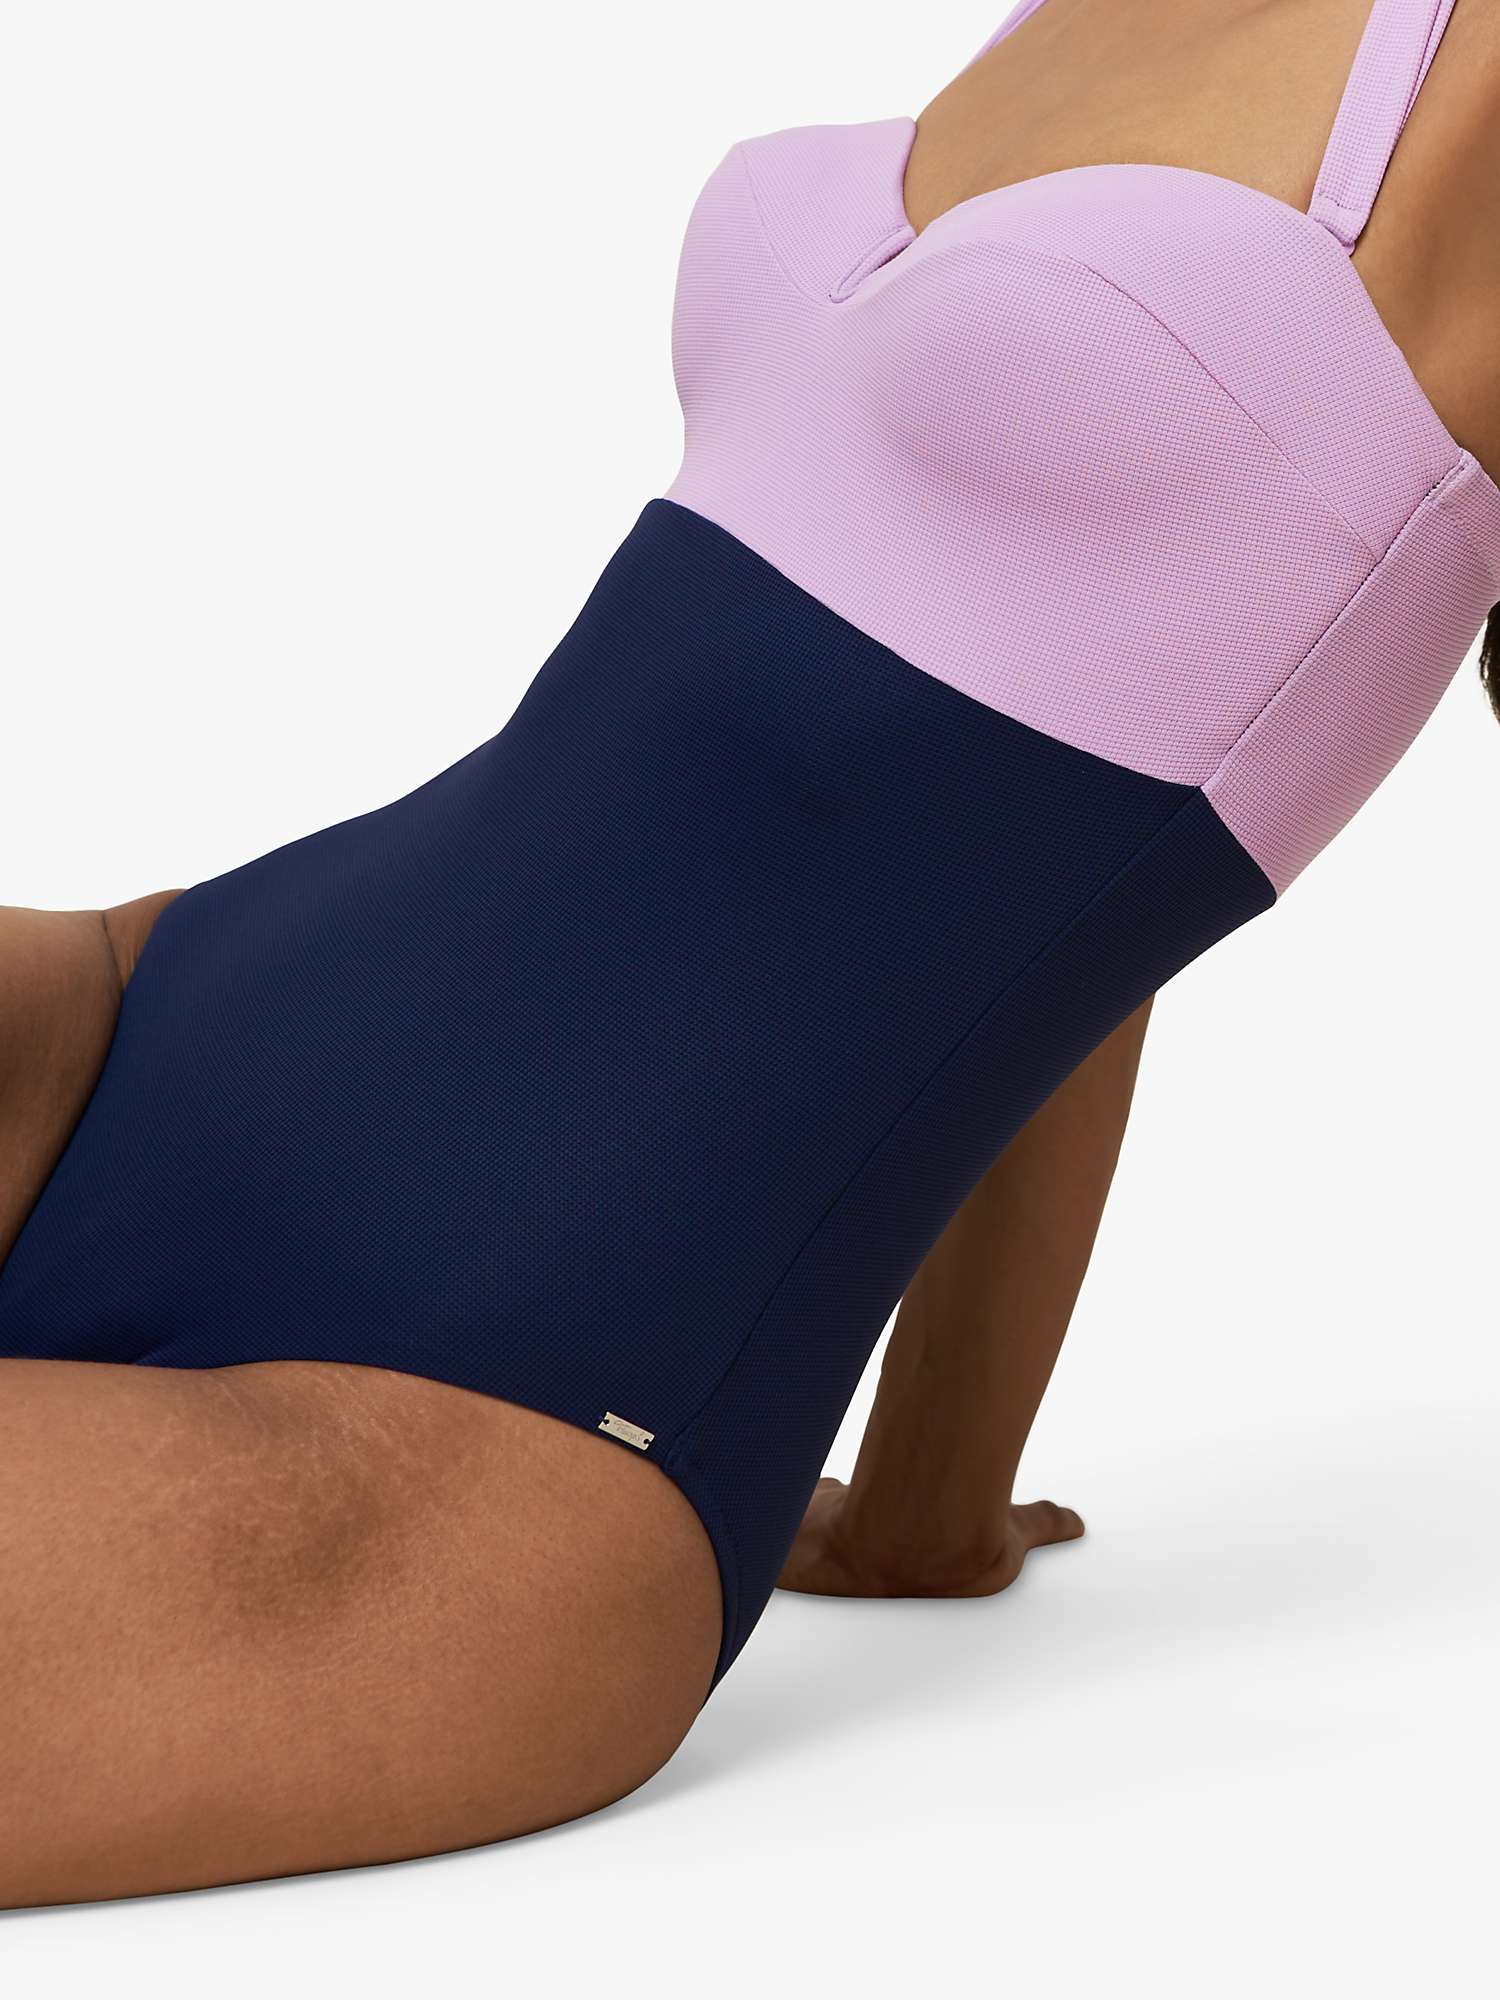 Buy Triumph Summer Glow Padded Bandeau Swimsuit Online at johnlewis.com